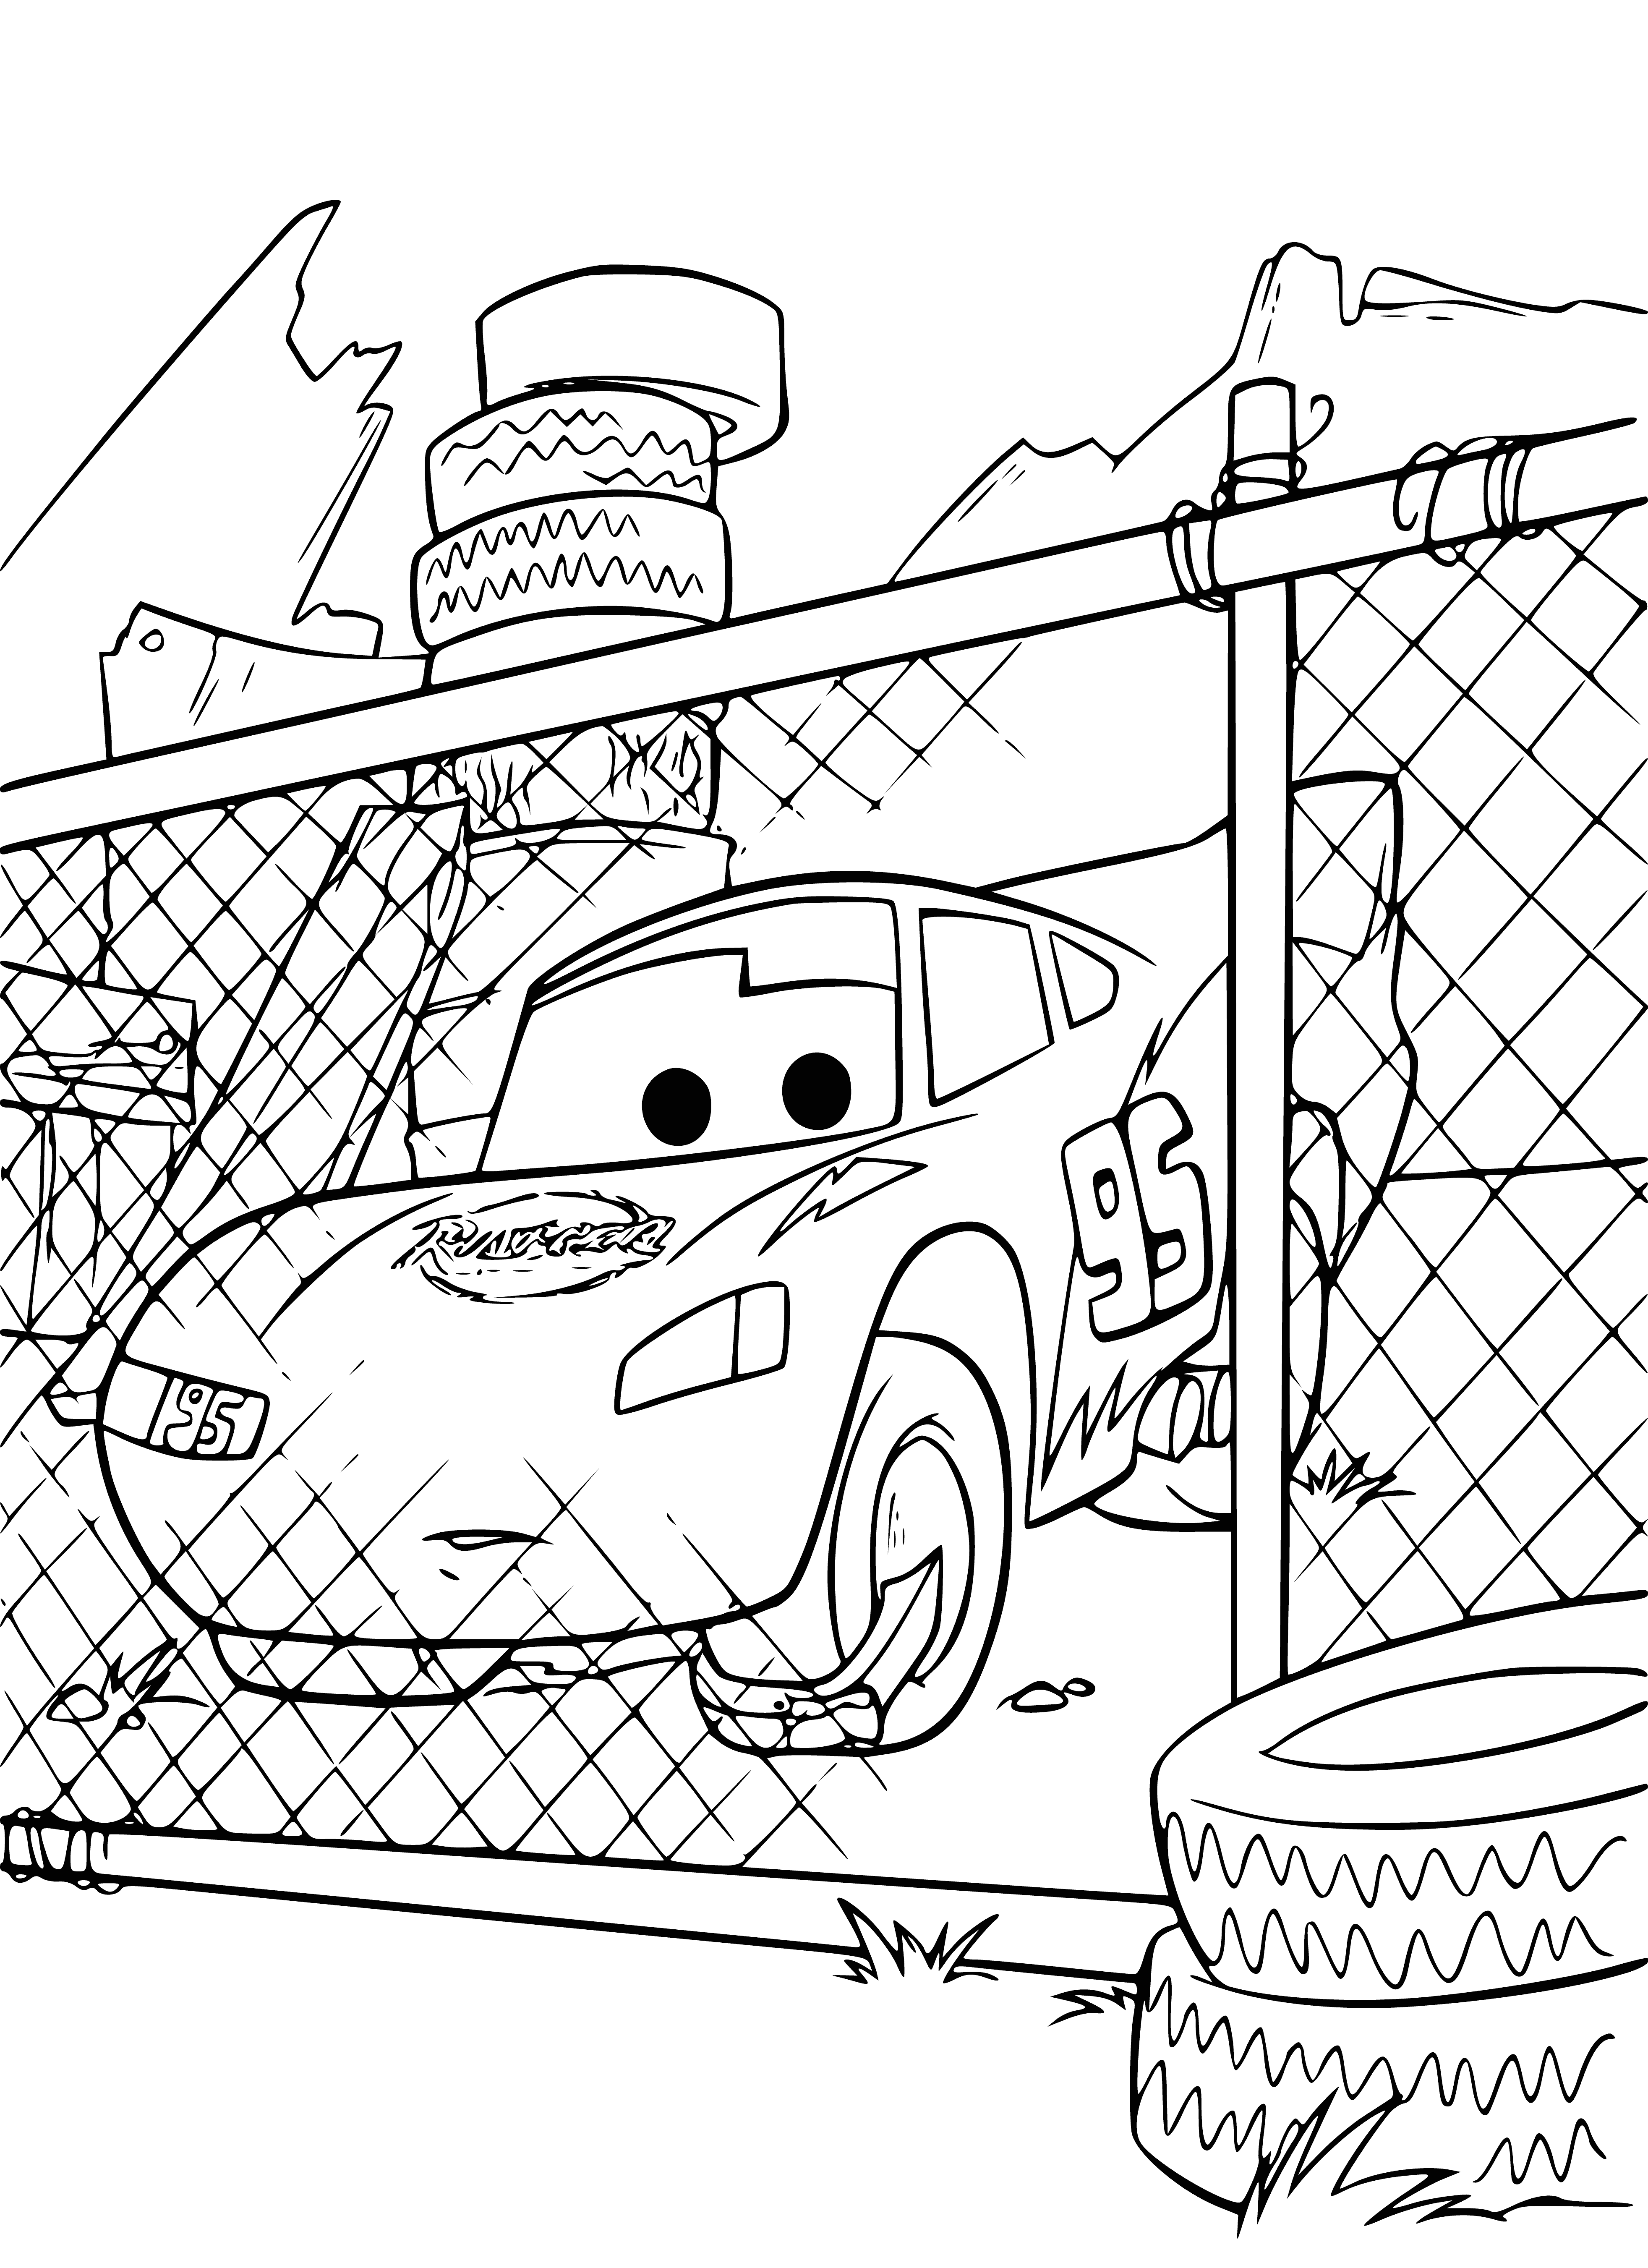 coloring page: Officer arresting person in car, placing hand on shoulder & asking them to exit; person appears to be complying.